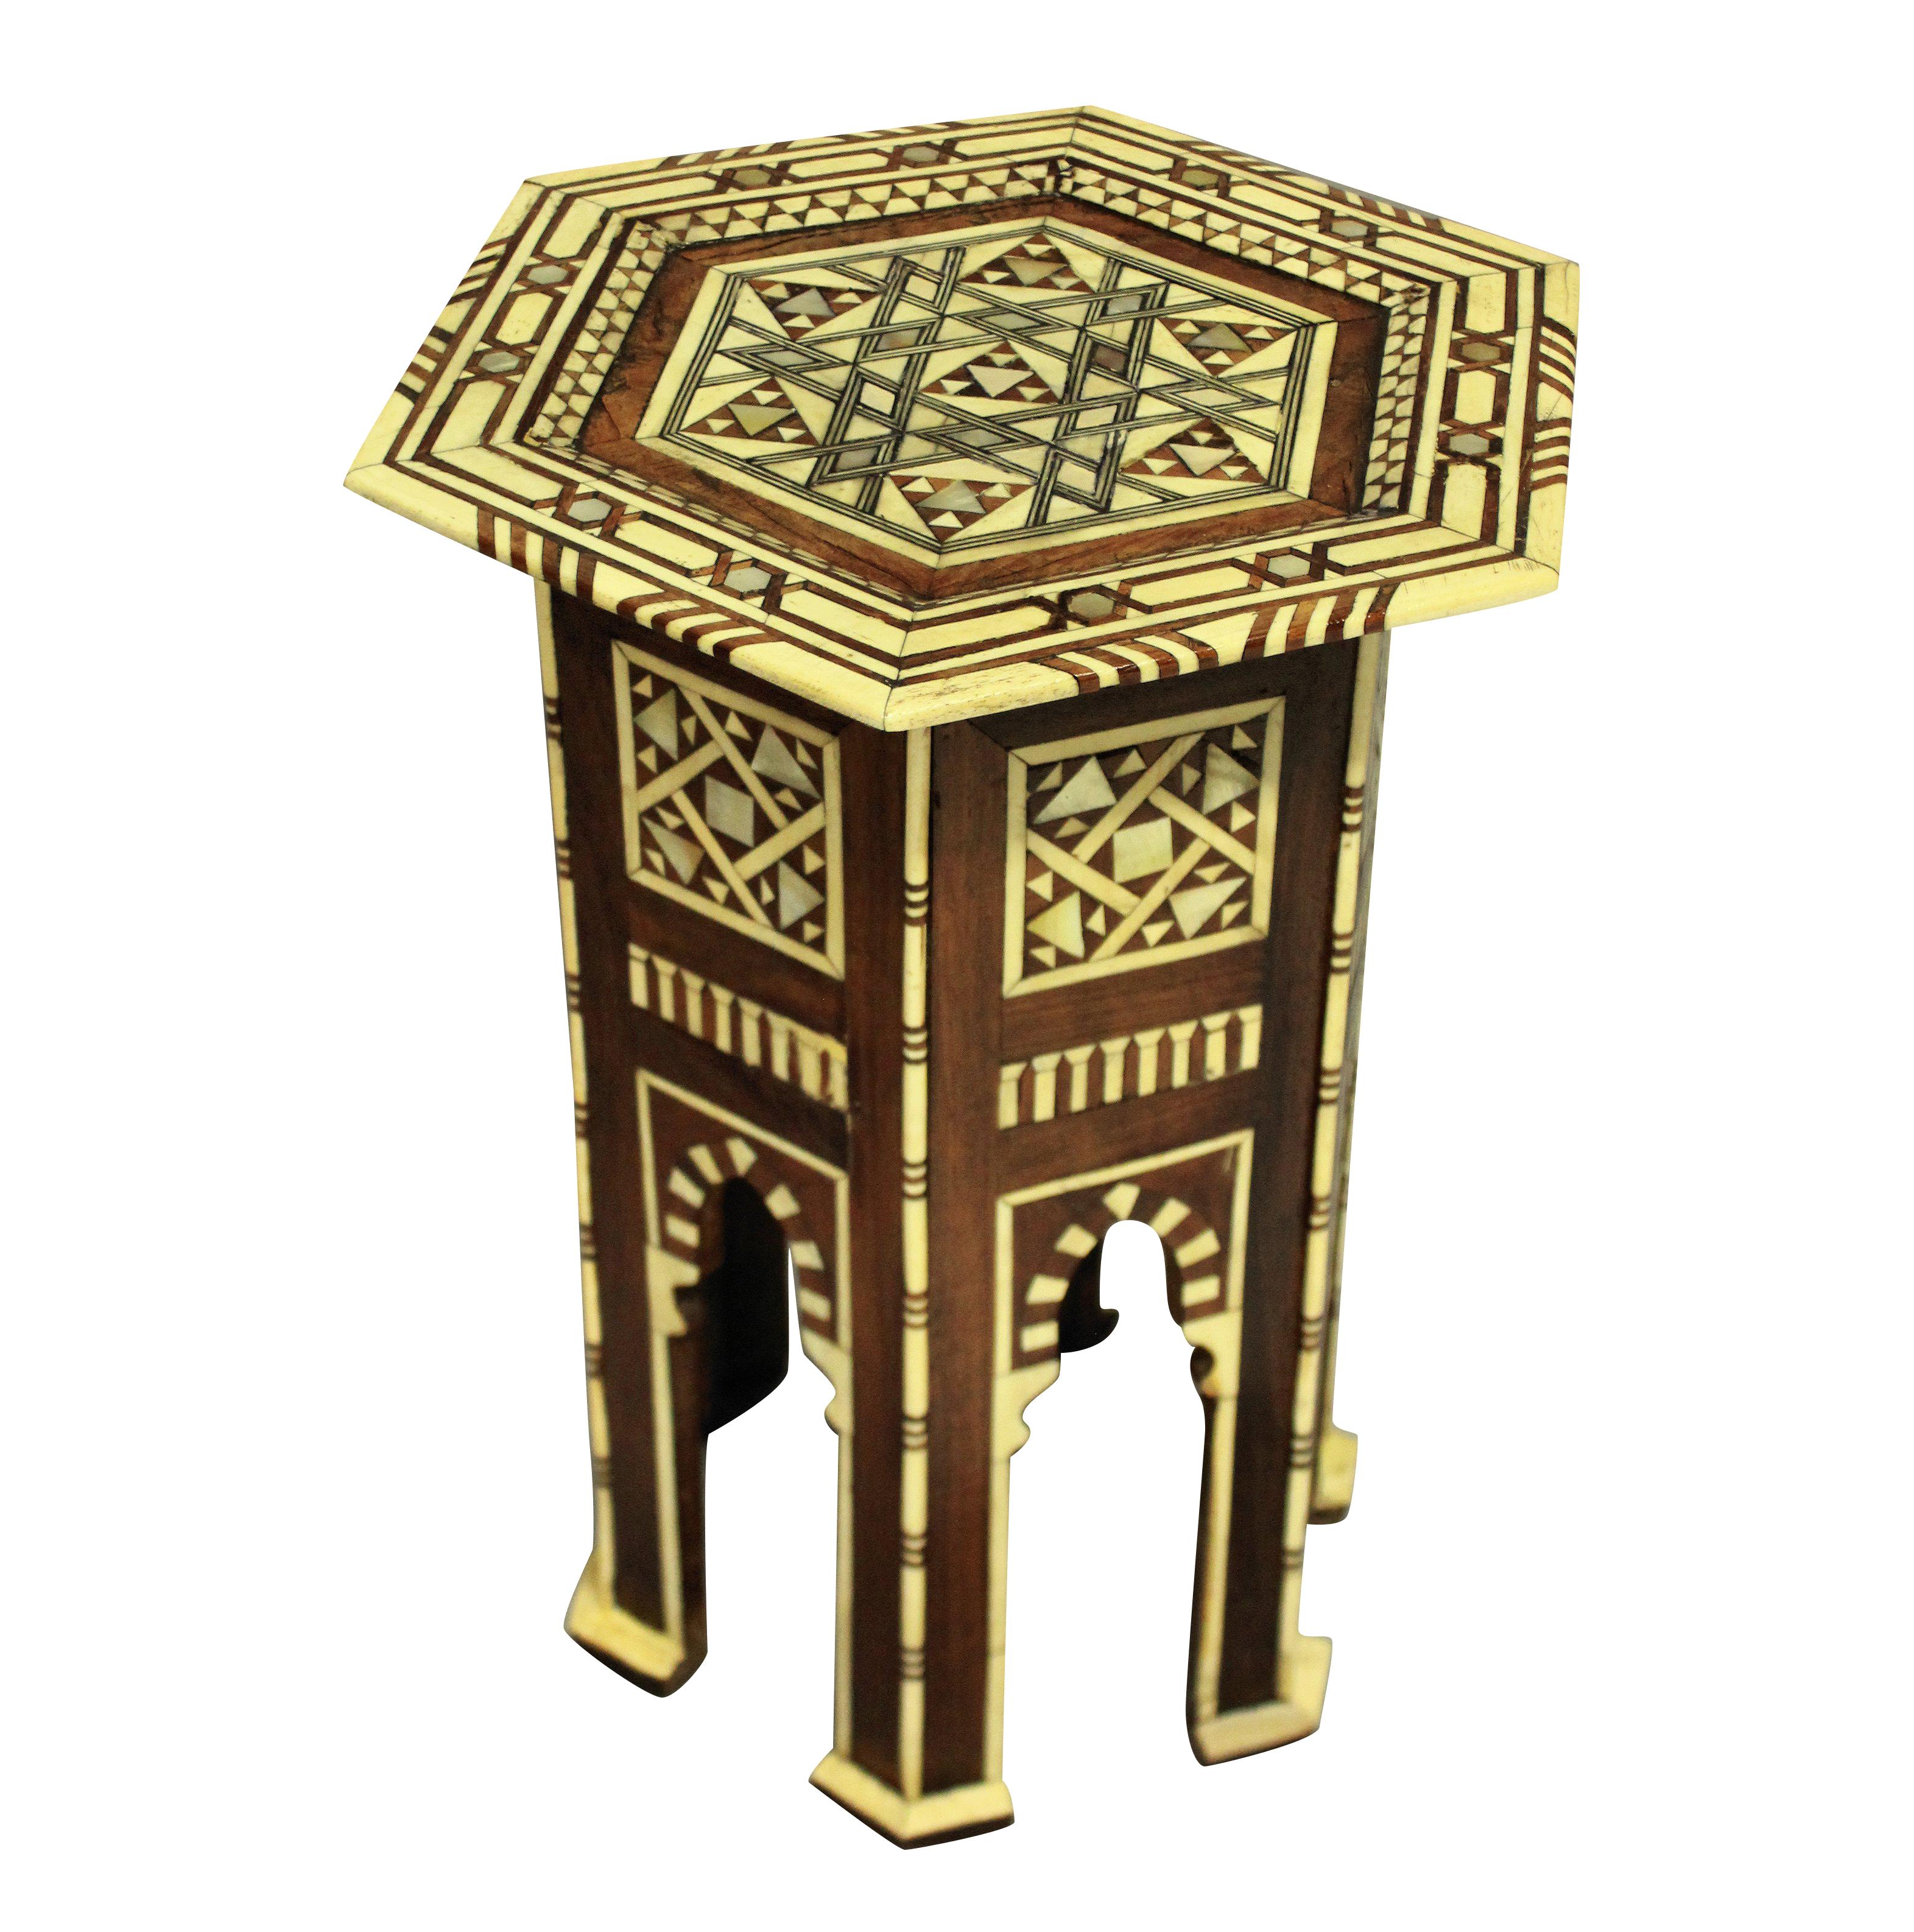 A fine Moorish side table inlaid with bone and mother of pearl in geometric designs.